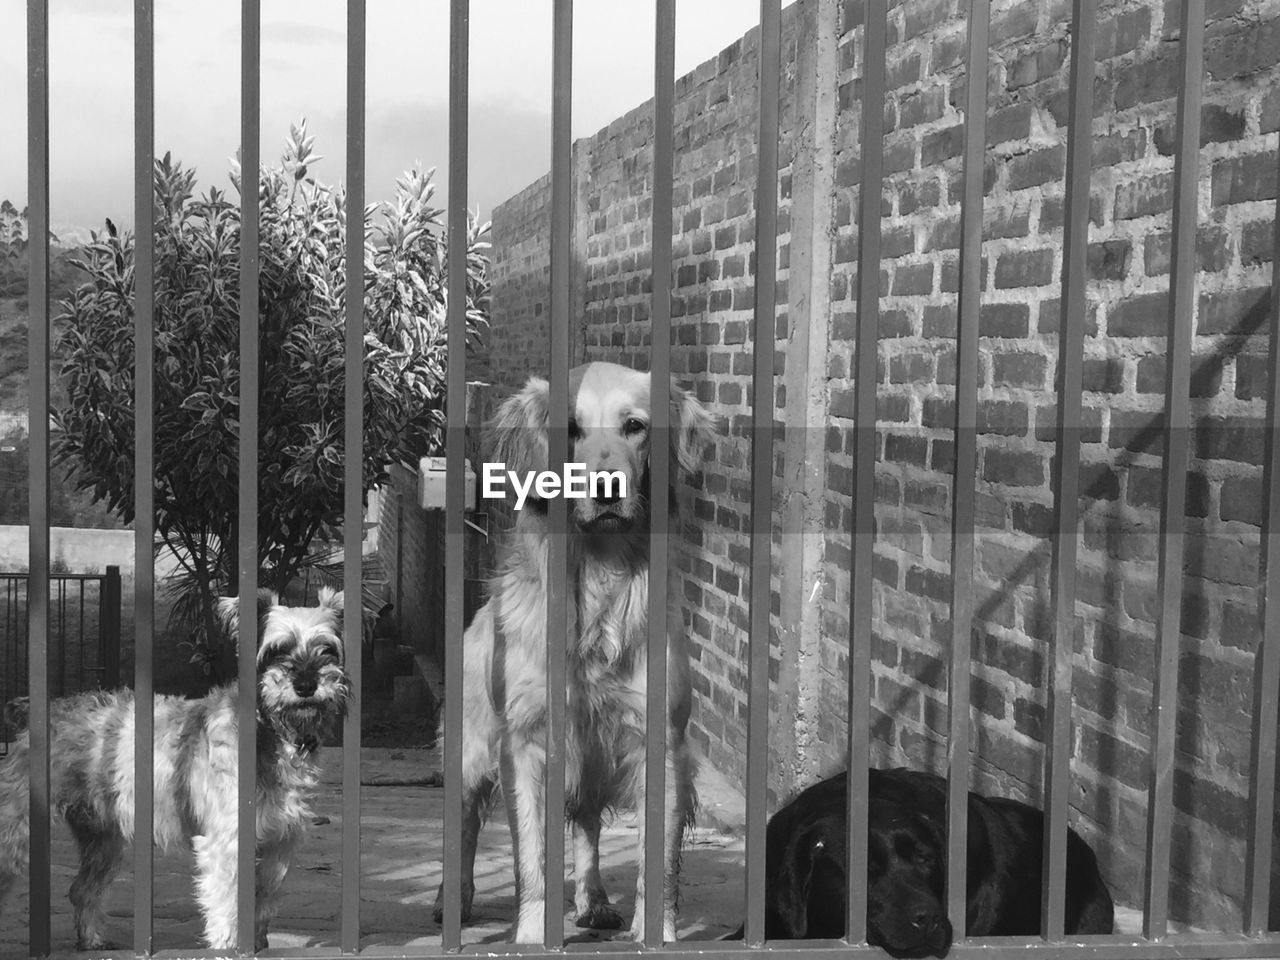 Portrait of dogs standing by gate